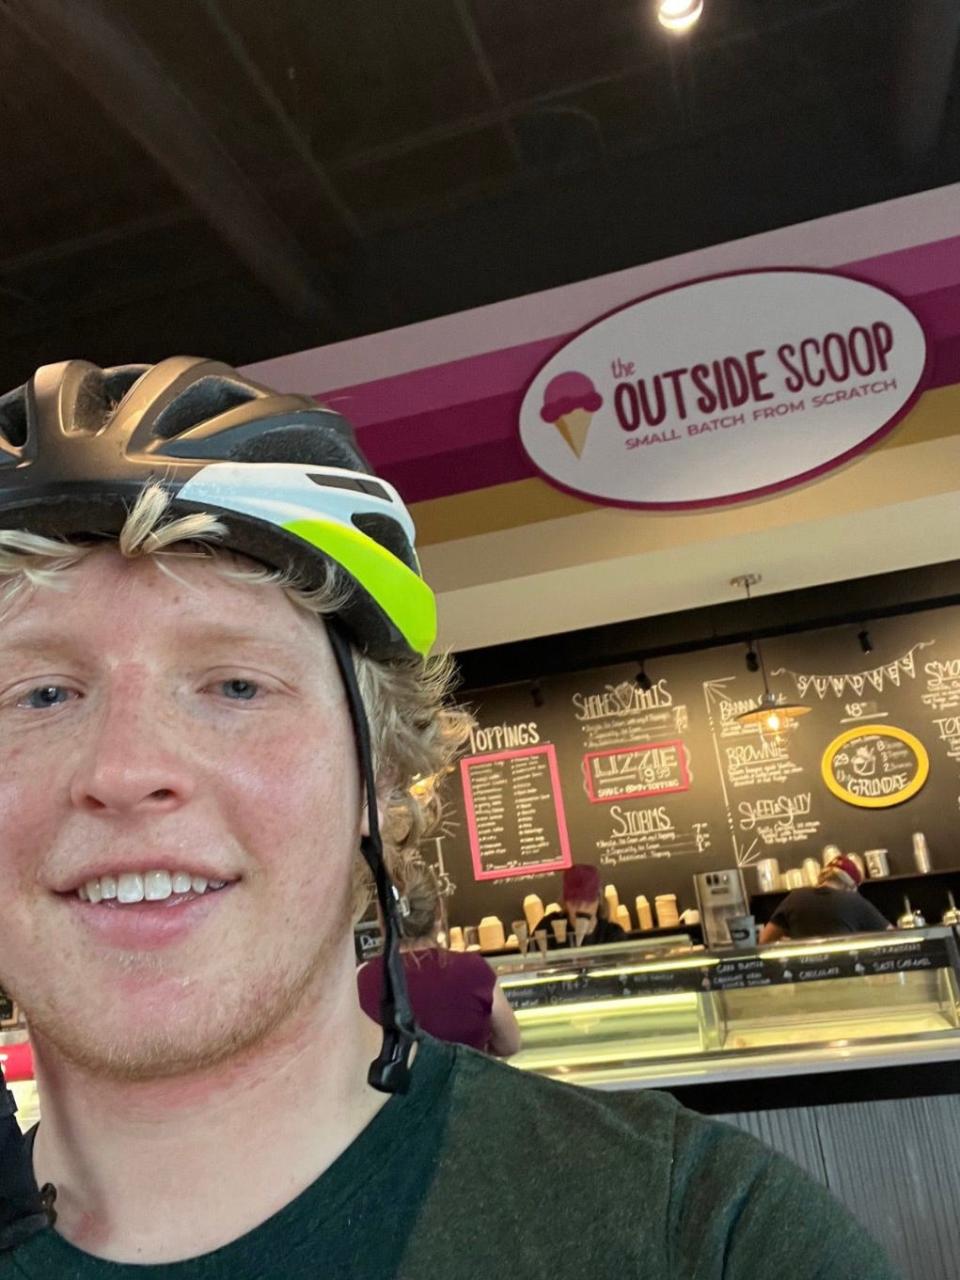 James Douthit takes a selfie at The Outside Scoop in Ankeny. Douthit has been riding his bicycle from Ames to various ice cream shops in central Iowa this summer.